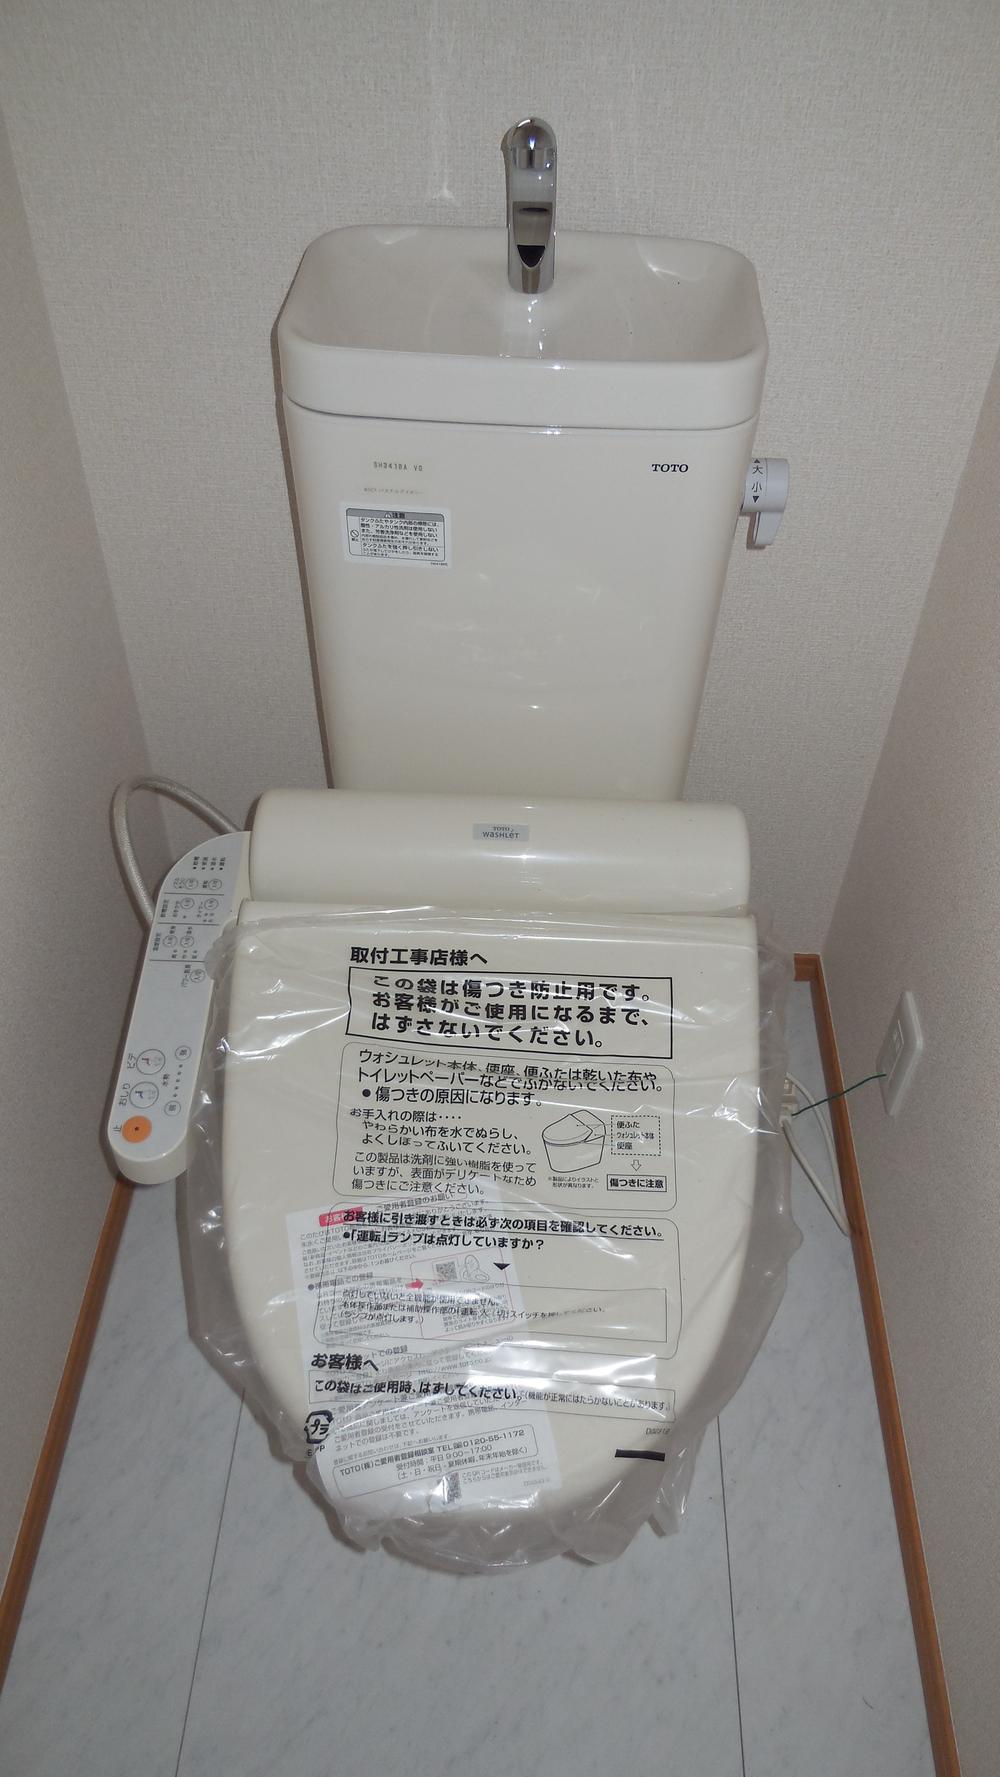 Toilet. Indoor (11 May 2013) Shooting ※ It will be the example of construction.